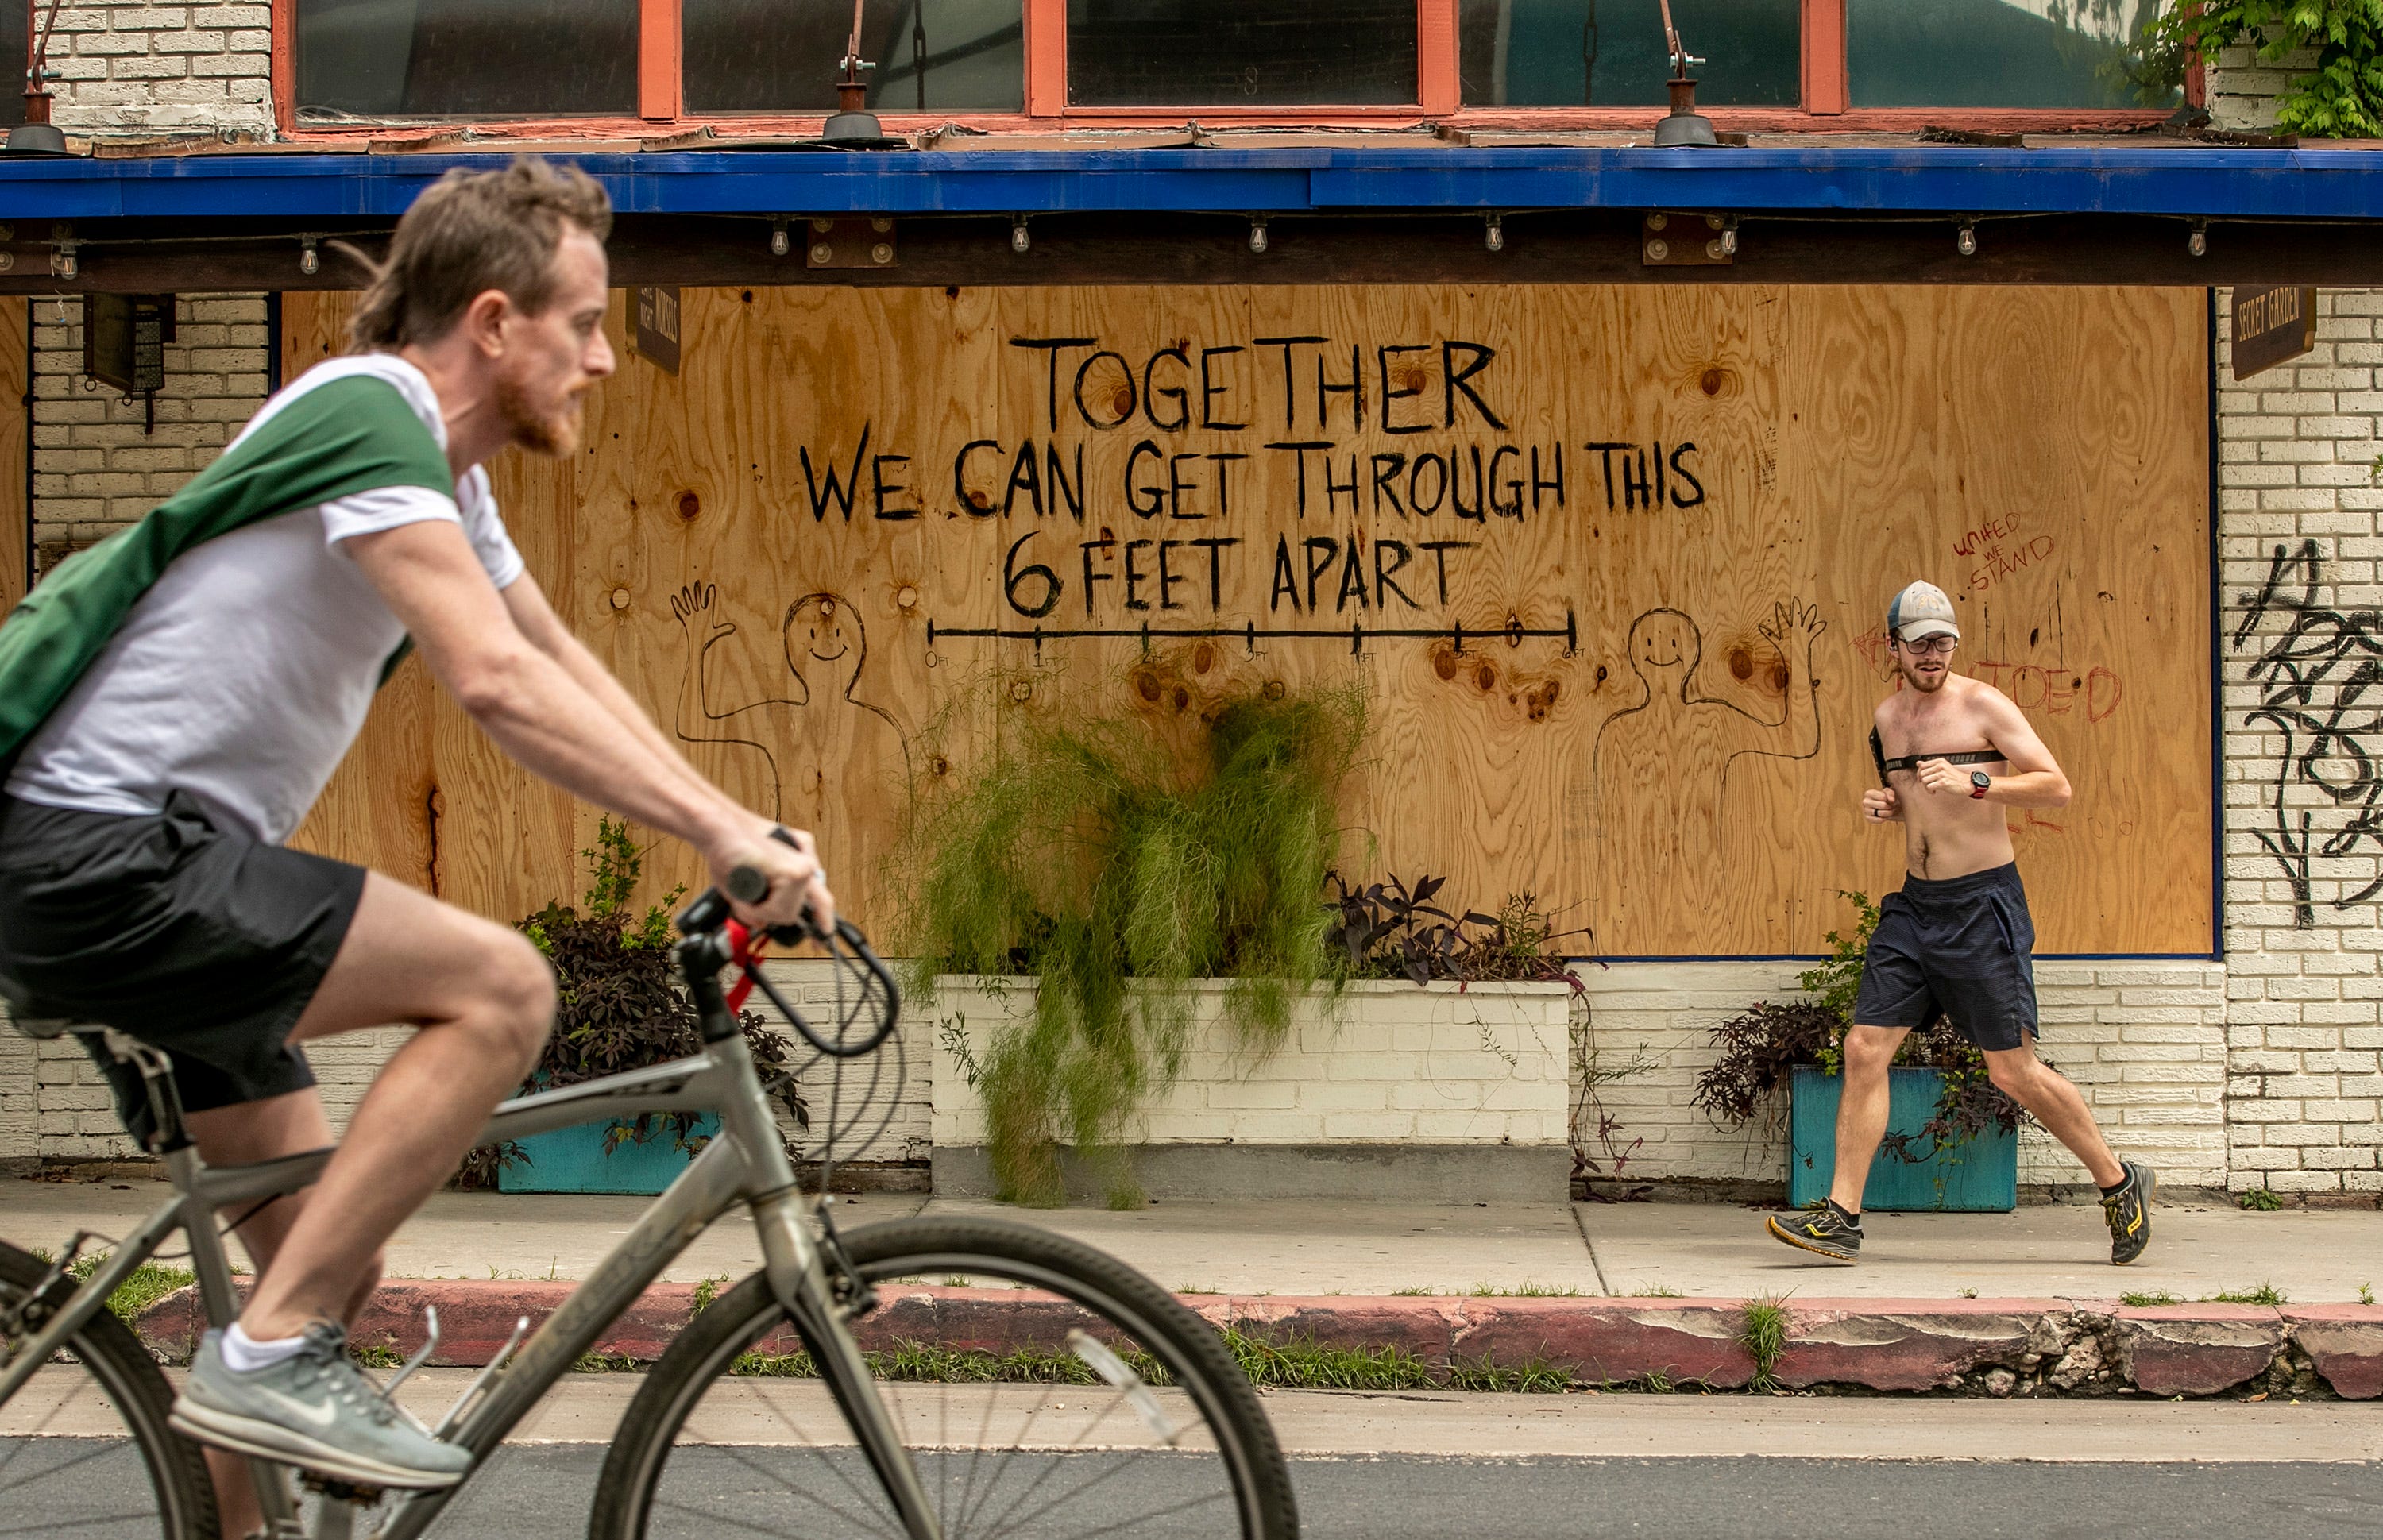 Jorden Stanley, right, runs past a hopeful message on a boarded up bar on East 6th Street on Monday April 6, 2020, during a shelter in place order due to the coronavirus pandemic.